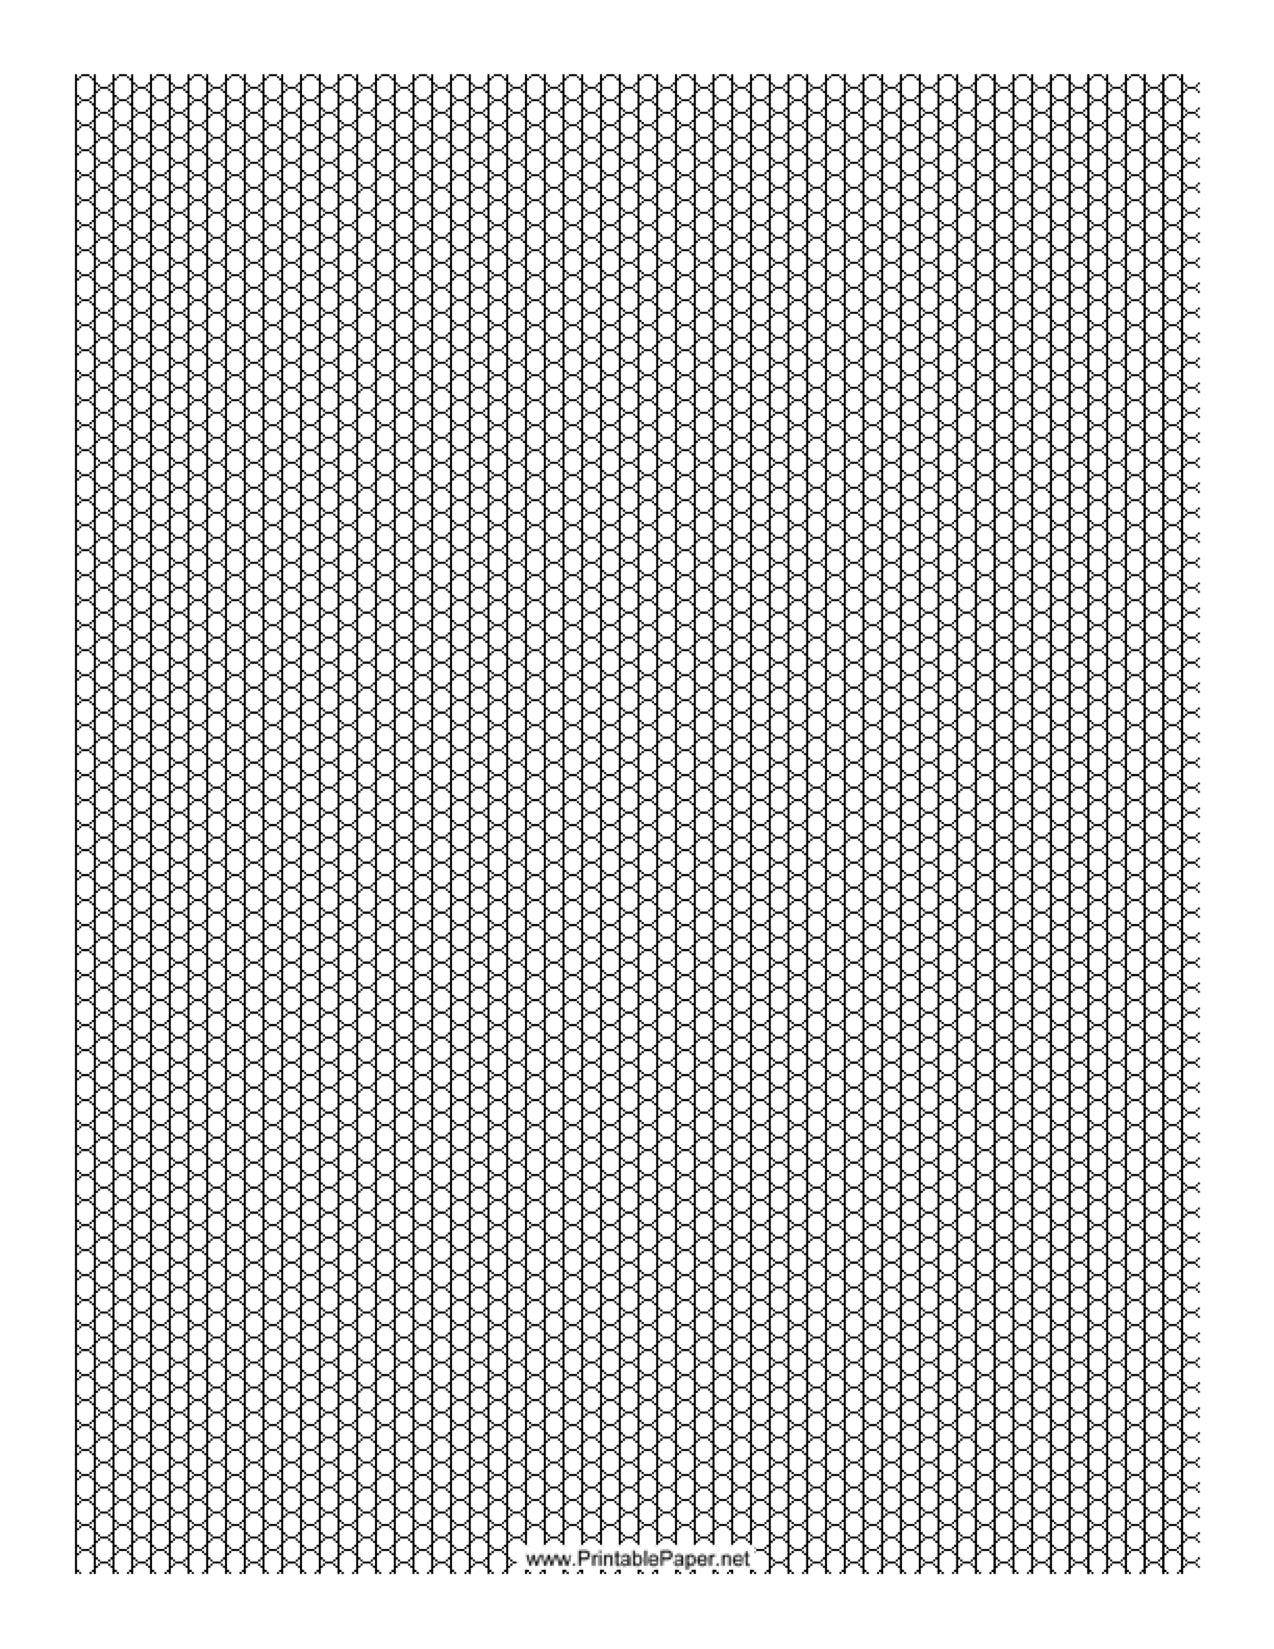 One Seed Bead Peyote Stitch Graph Paper